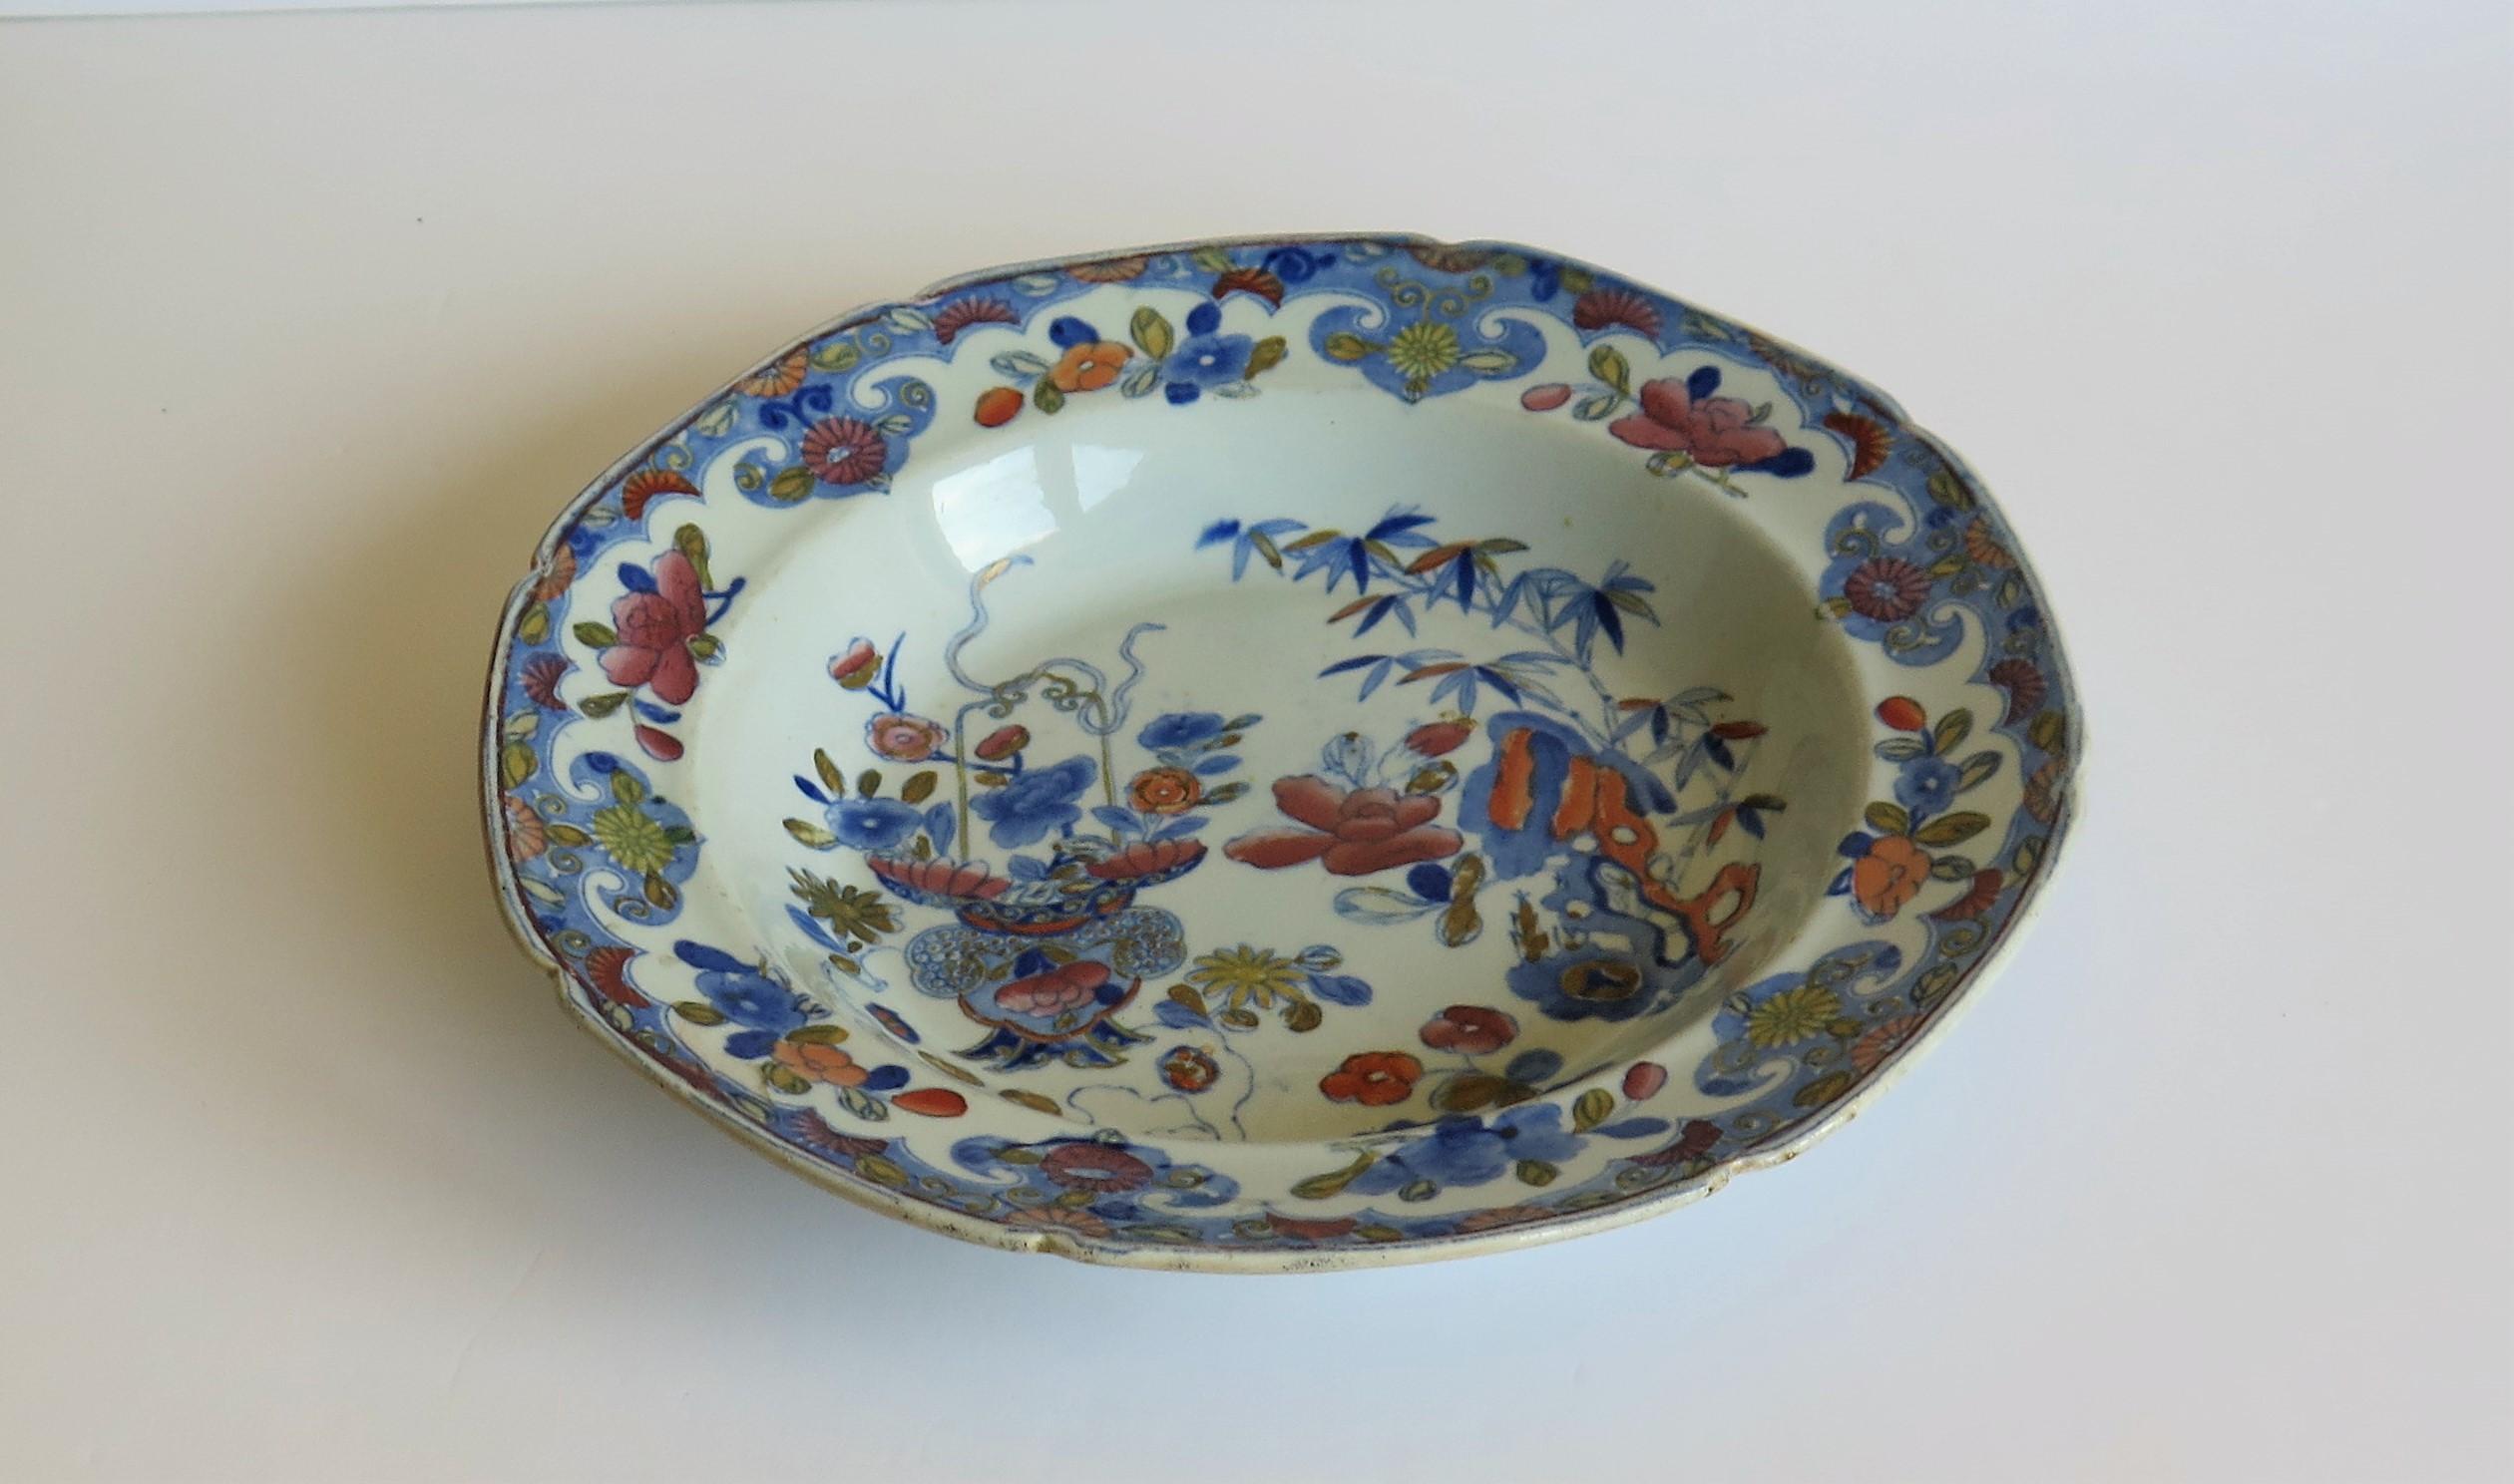 Hand-Painted Very Early Mason's Ironstone Soup Bowl or Plate Bamboo and Basket Pattern C 1812